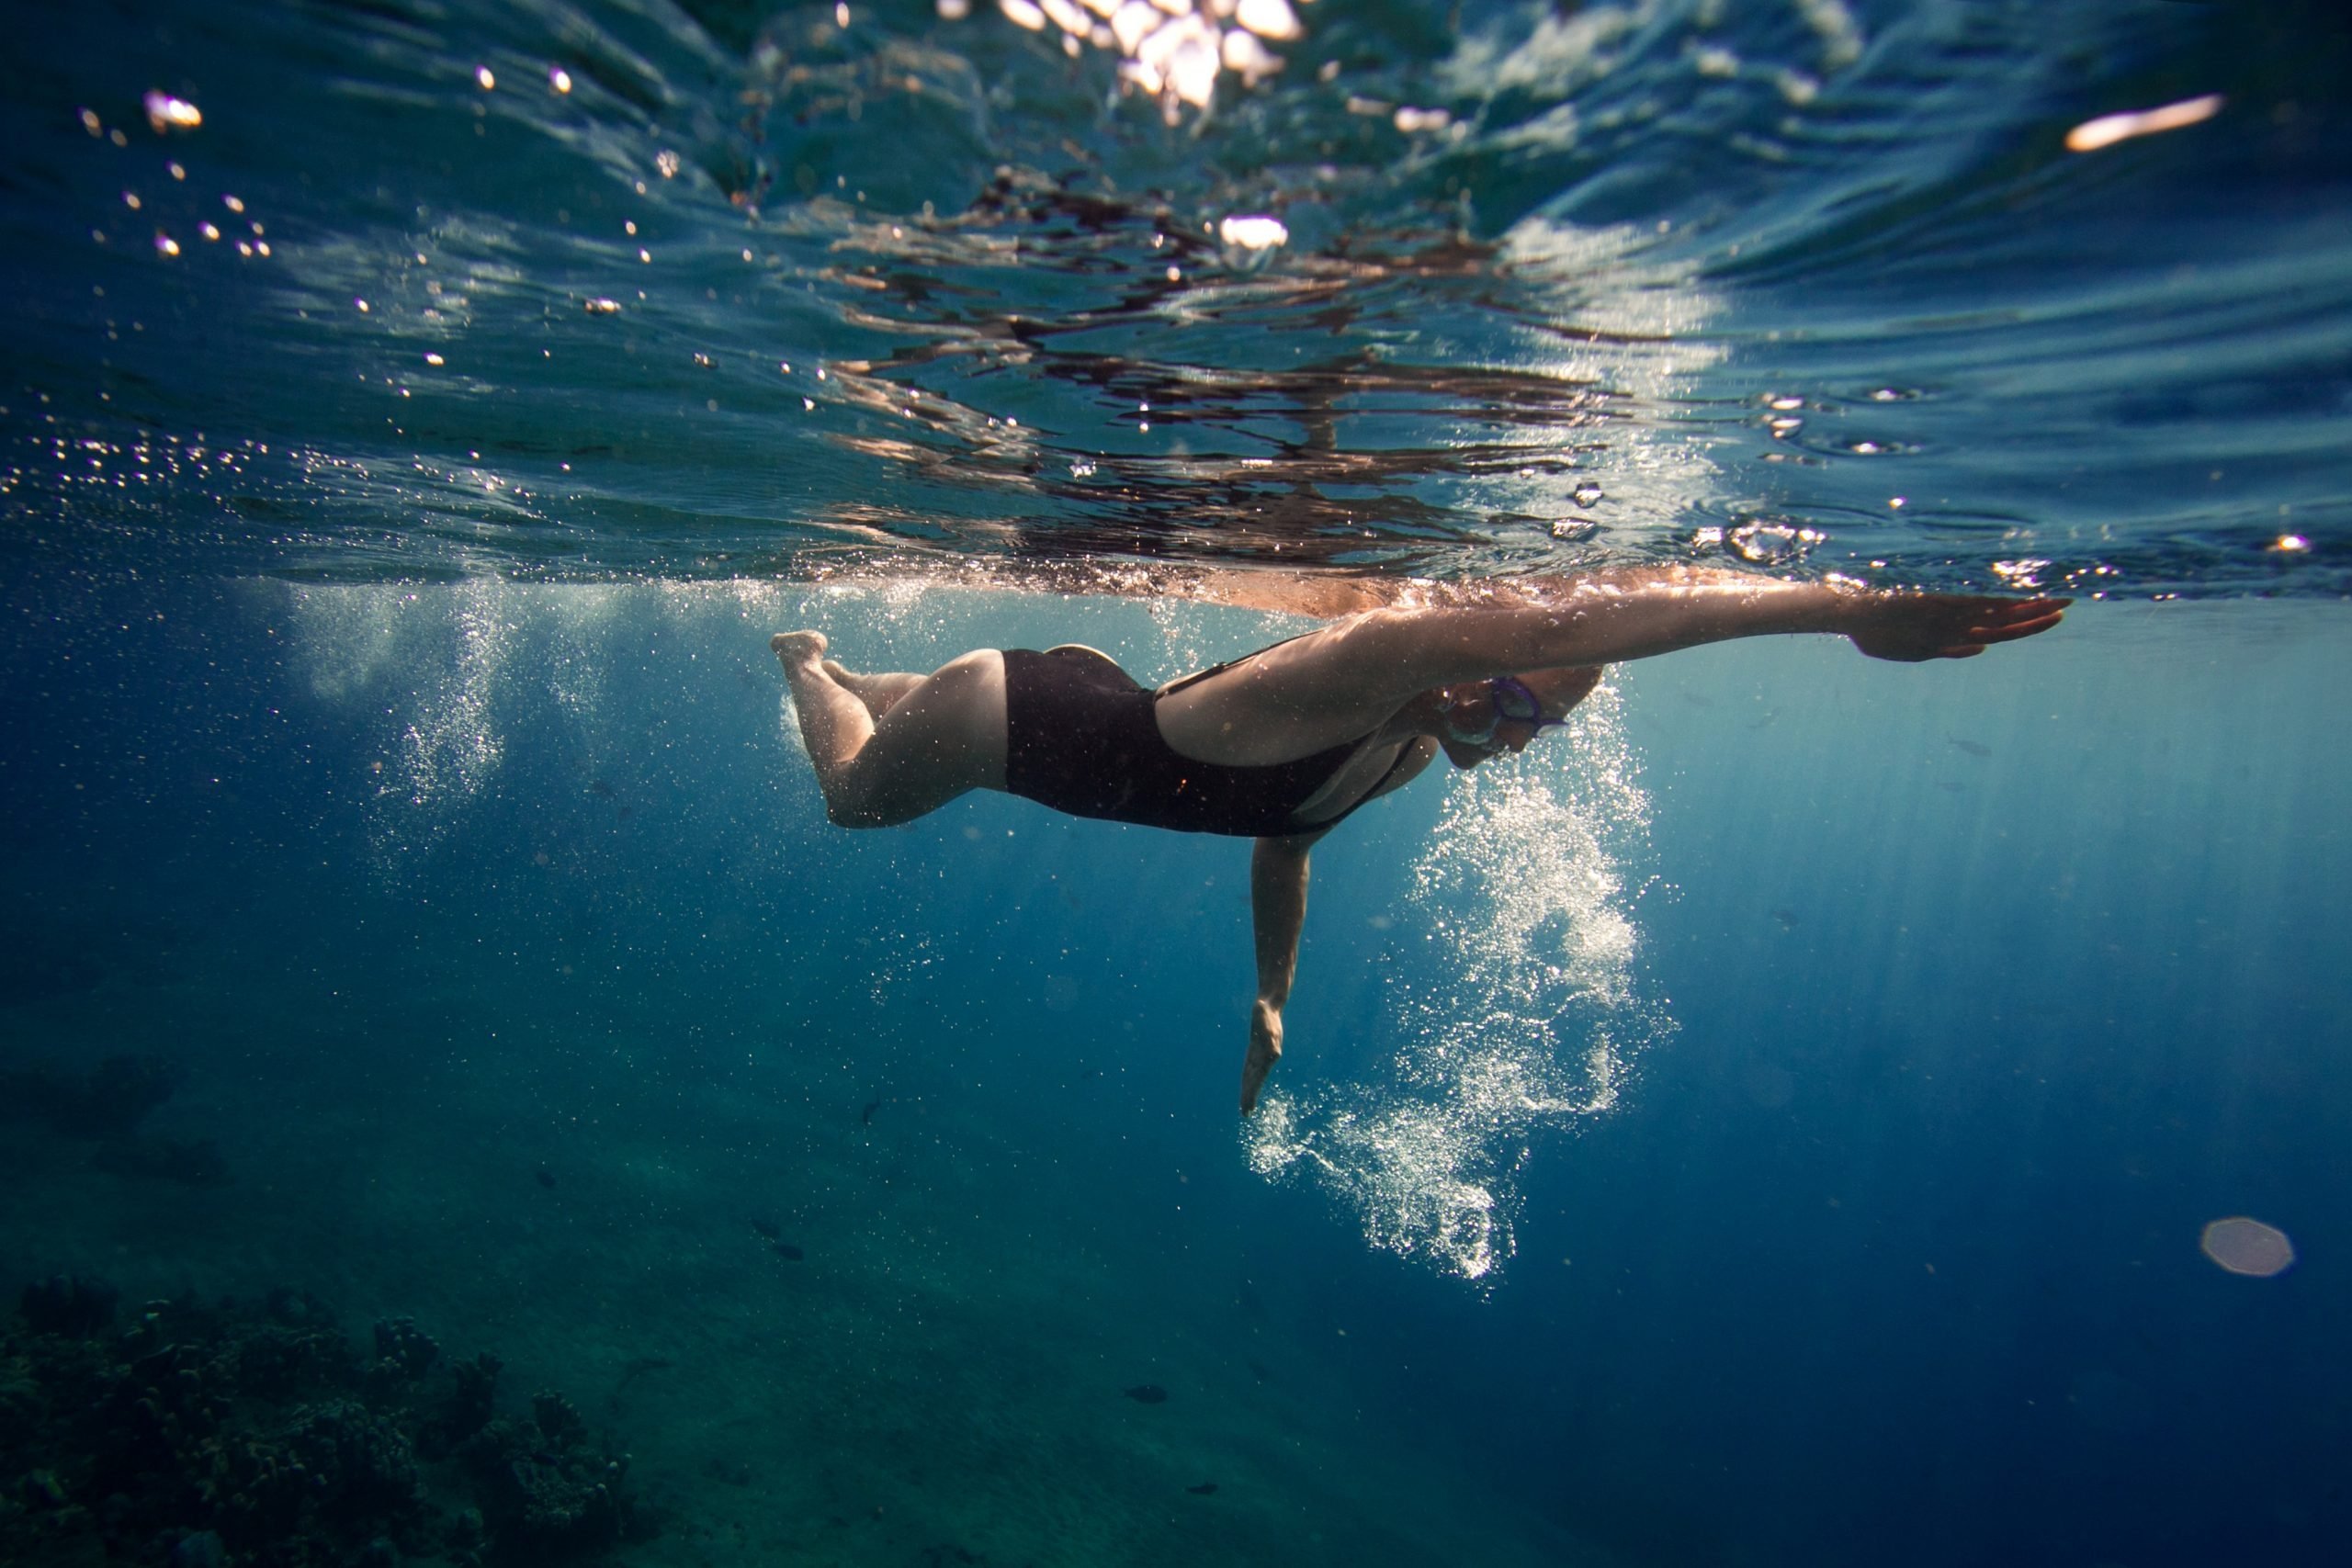 Why do humans like to swim? - The Psychology of Swimming